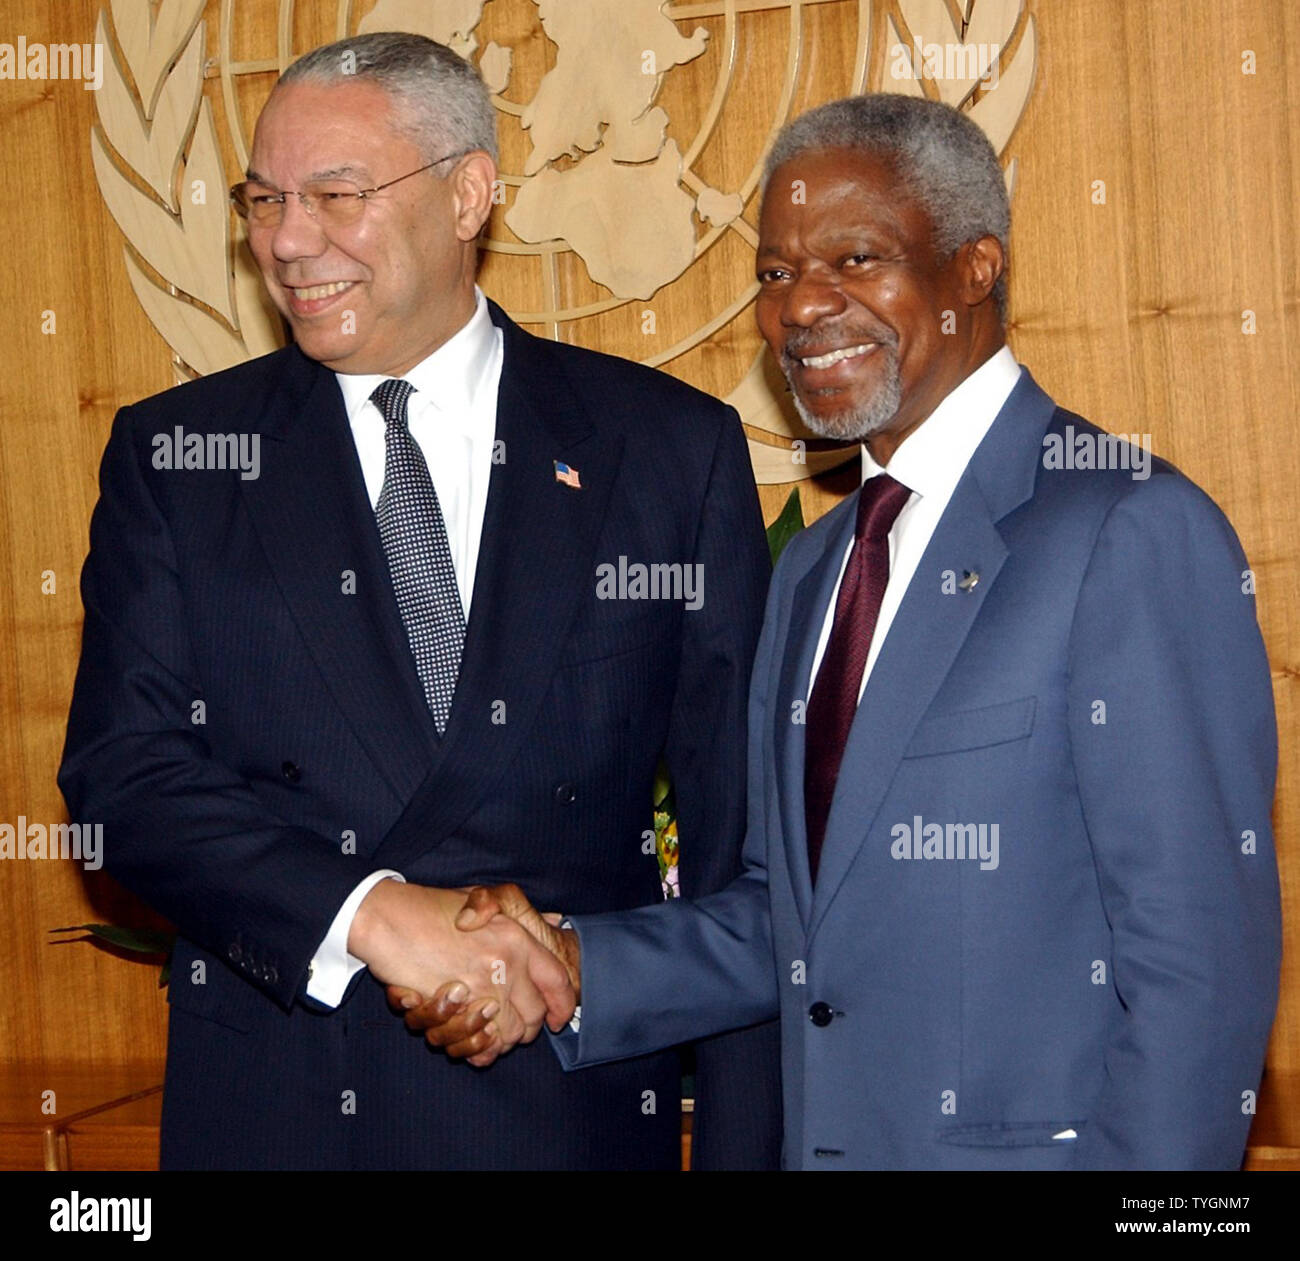 UN Secretary General Kofi Annan and US Secretary of State Colin Powell (left) meet for consulations and a joint press conference on July 22, 2004 on efforts to aid Sudan (UPI Photo/Ezio Petersen) Stock Photo